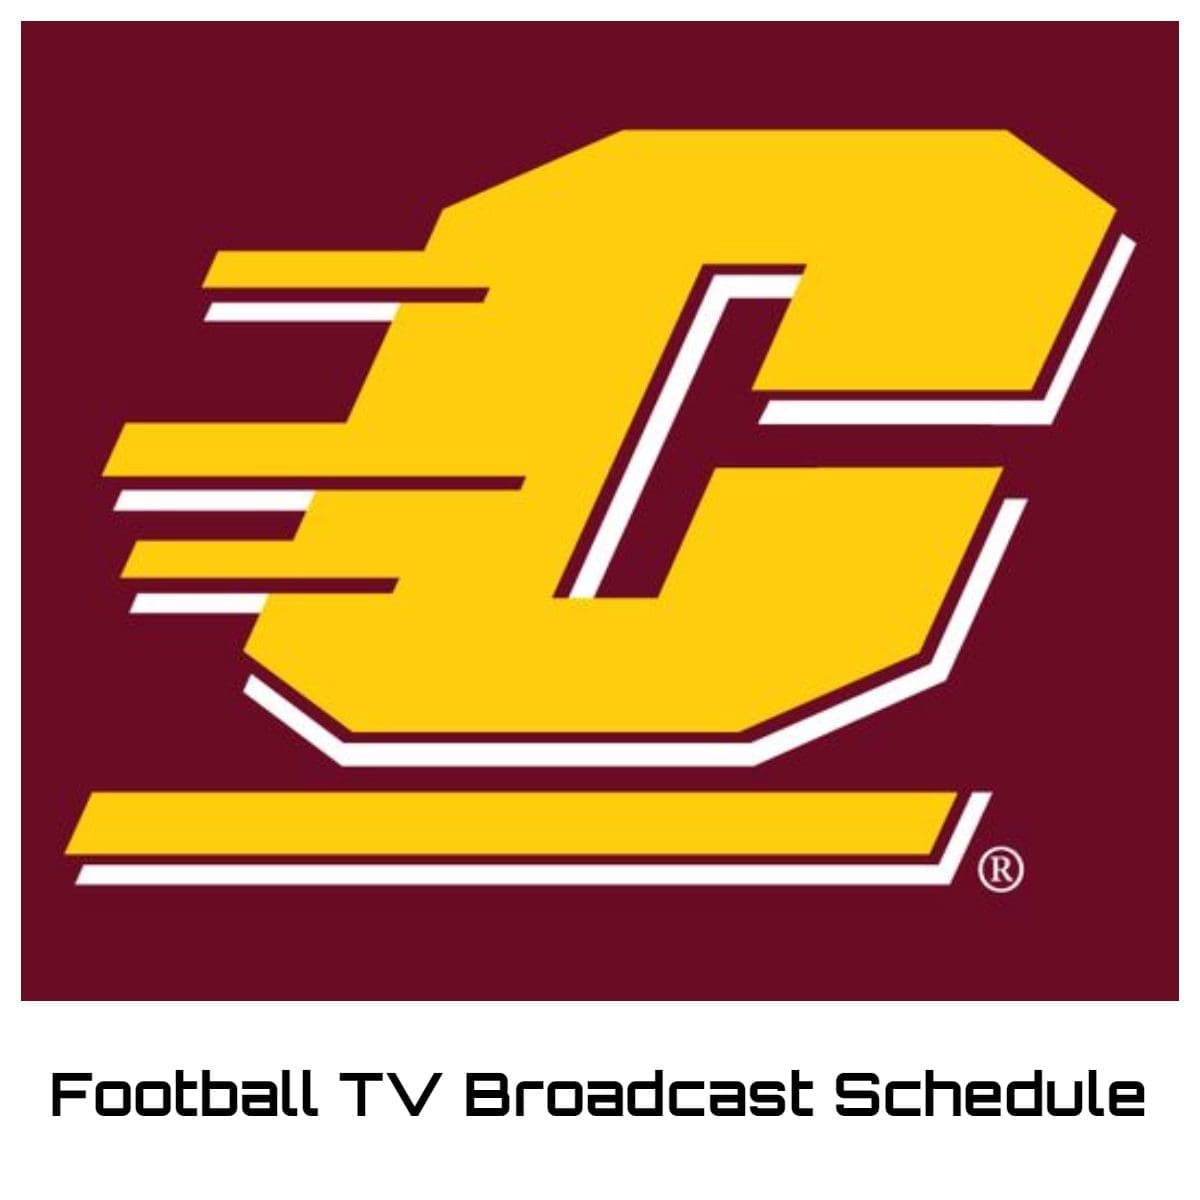 Central Michigan Chippewas Football TV Broadcast Schedule